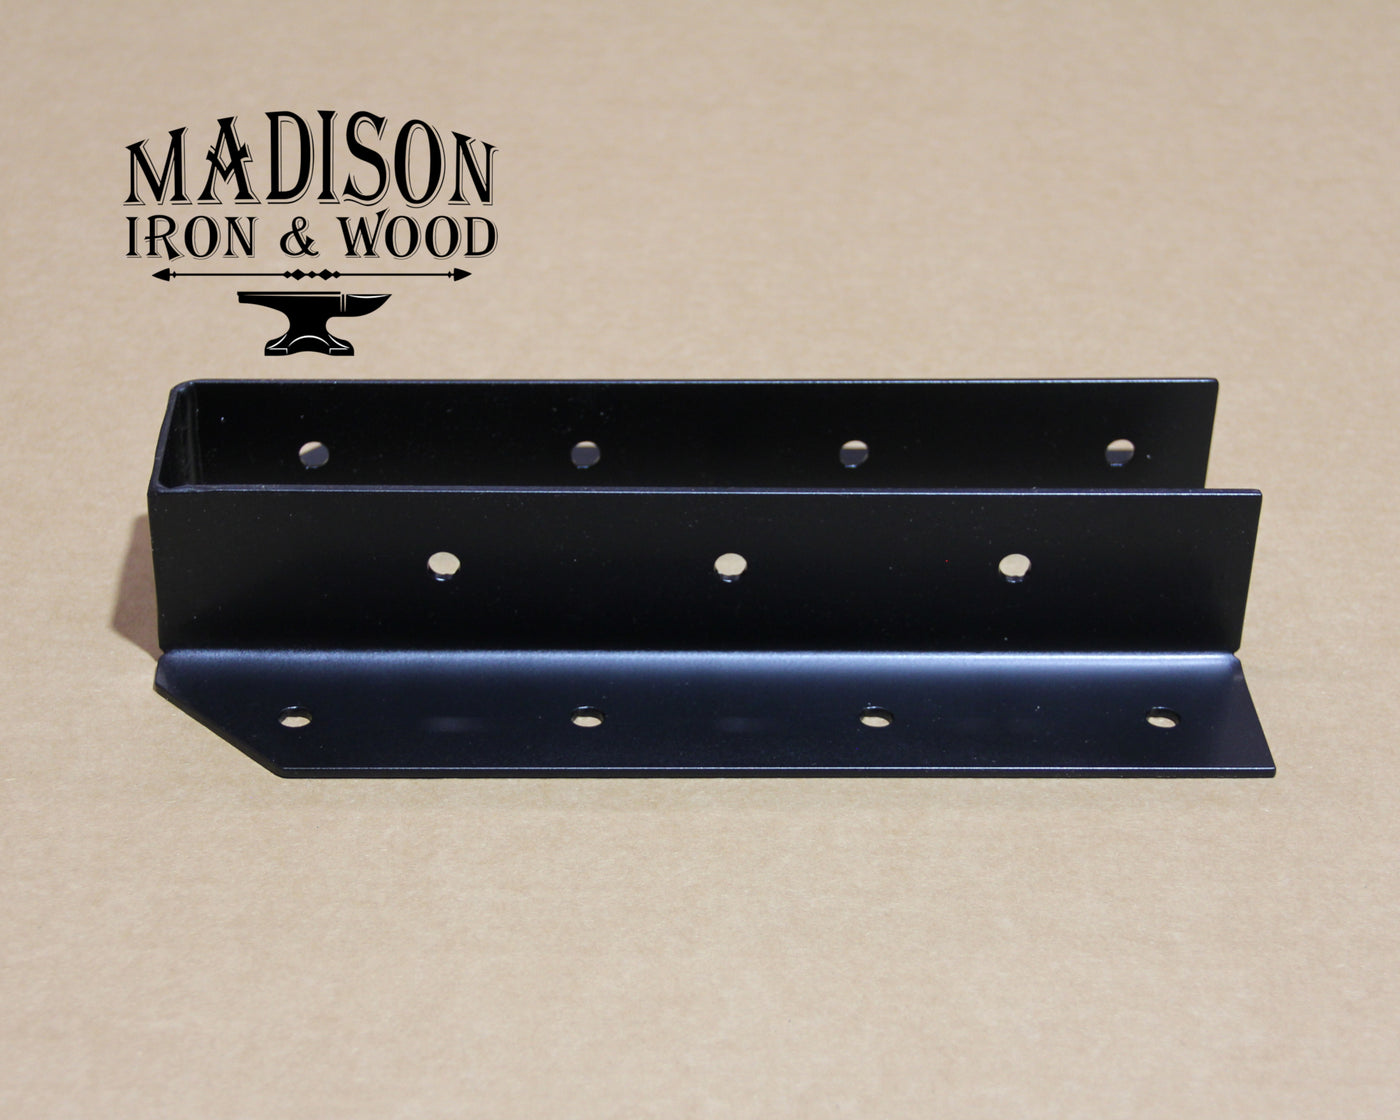 2"x12" Joist Hanger Bracket - Madison Iron and Wood - Brackets - metal outdoor decor - Steel deocrations - american made products - veteran owned business products - fencing decorations - fencing supplies - custom wall decorations - personalized wall signs - steel - decorative post caps - steel post caps - metal post caps - brackets - structural brackets - home improvement - easter - easter decorations - easter gift - easter yard decor